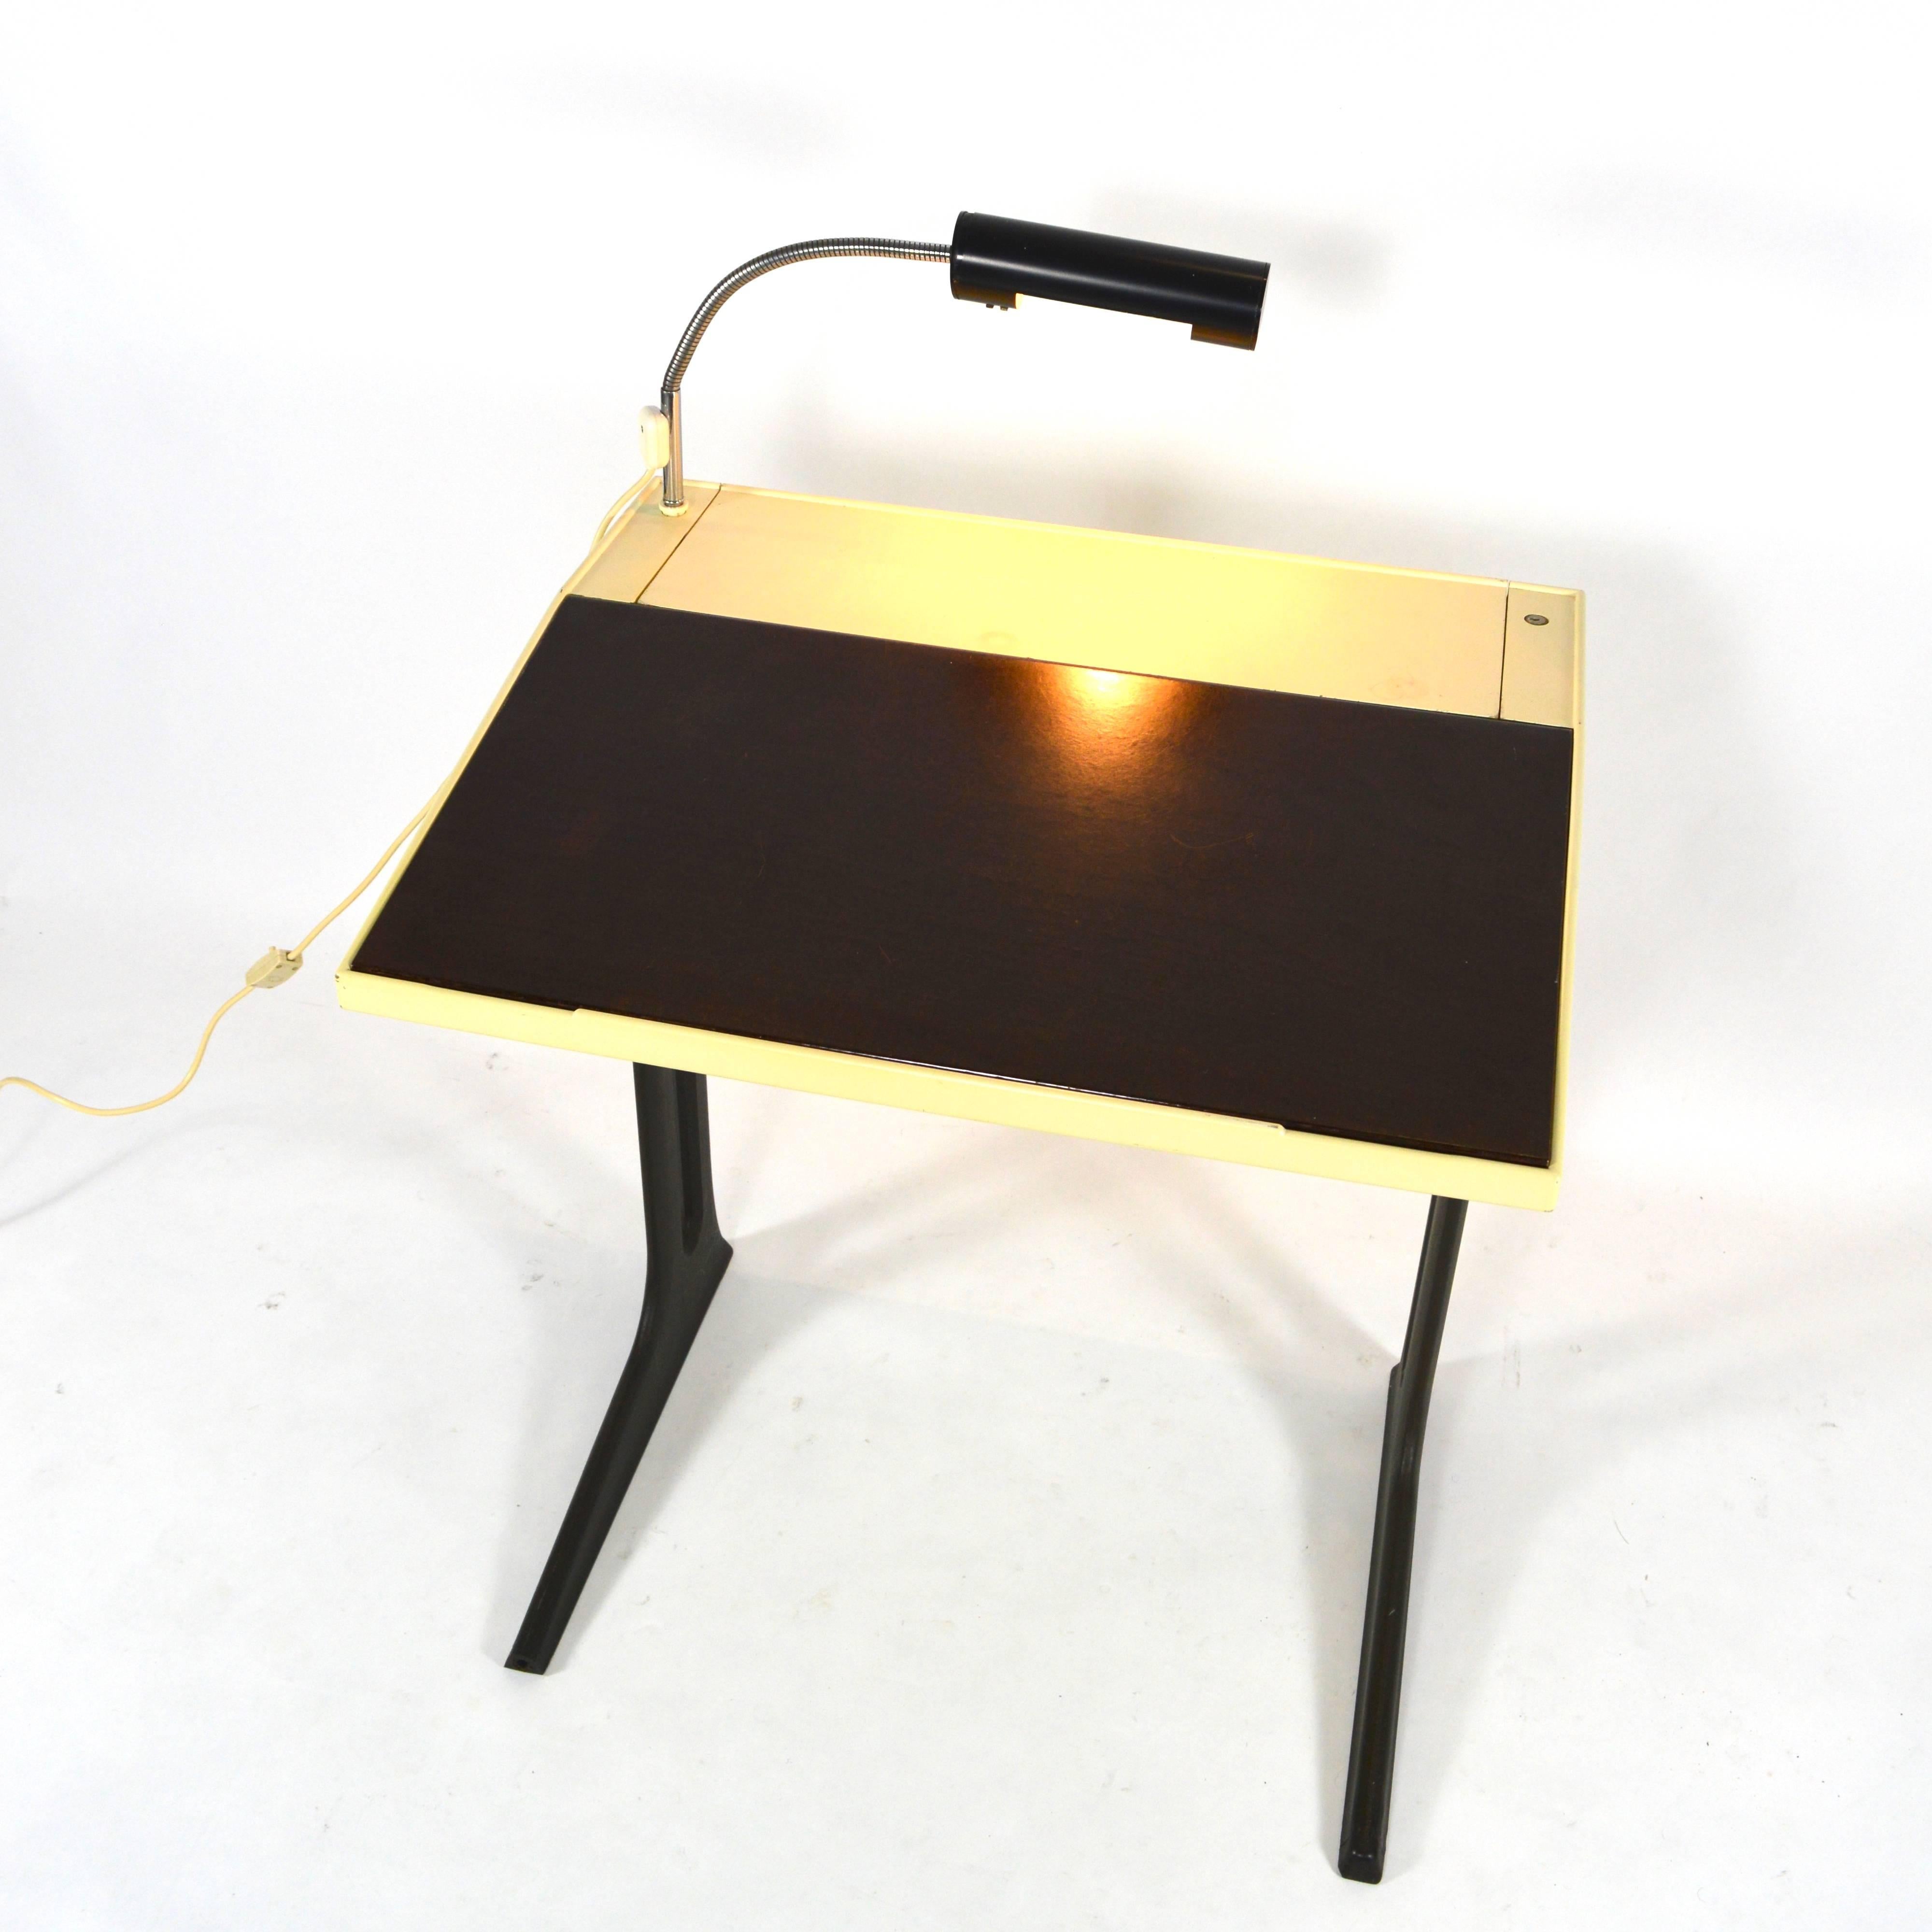 This is a very cool small desk by Elmar Flötotto with rare original lighting.
The brown writing leaf can be lifted to create a straight desk area. The back of the top can be lifted to create a book stand shelve for reading or studying. The desk is